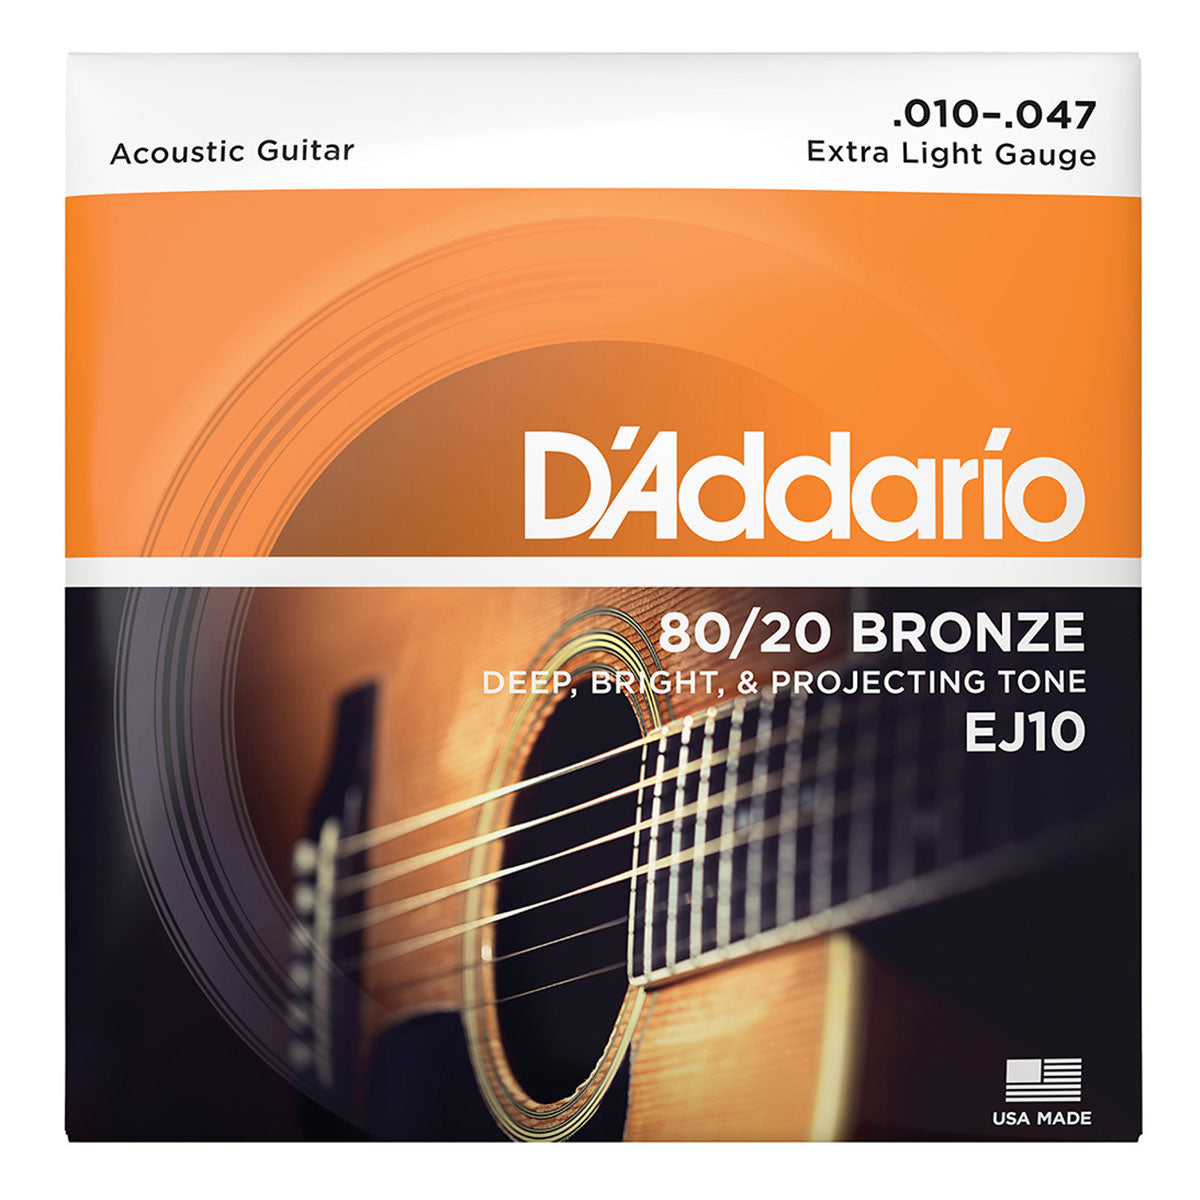 D'addario EJ10 80/20 Bronze Round Wound Acoustic Guitar Strings 010-047